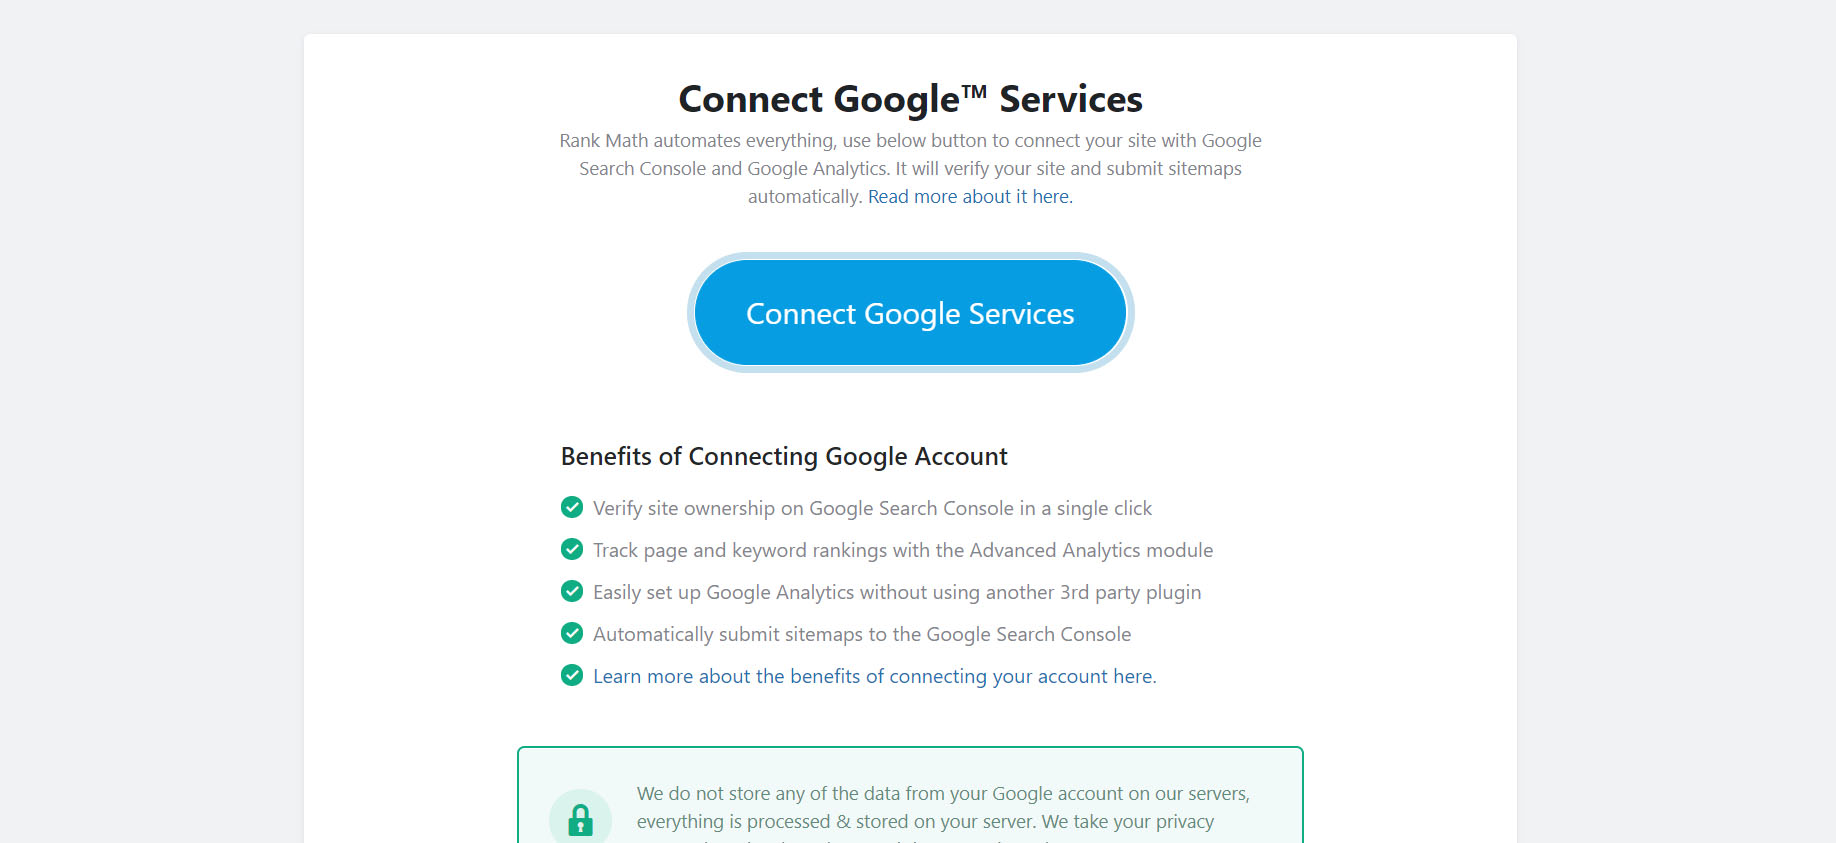 Connecting Your Google Account